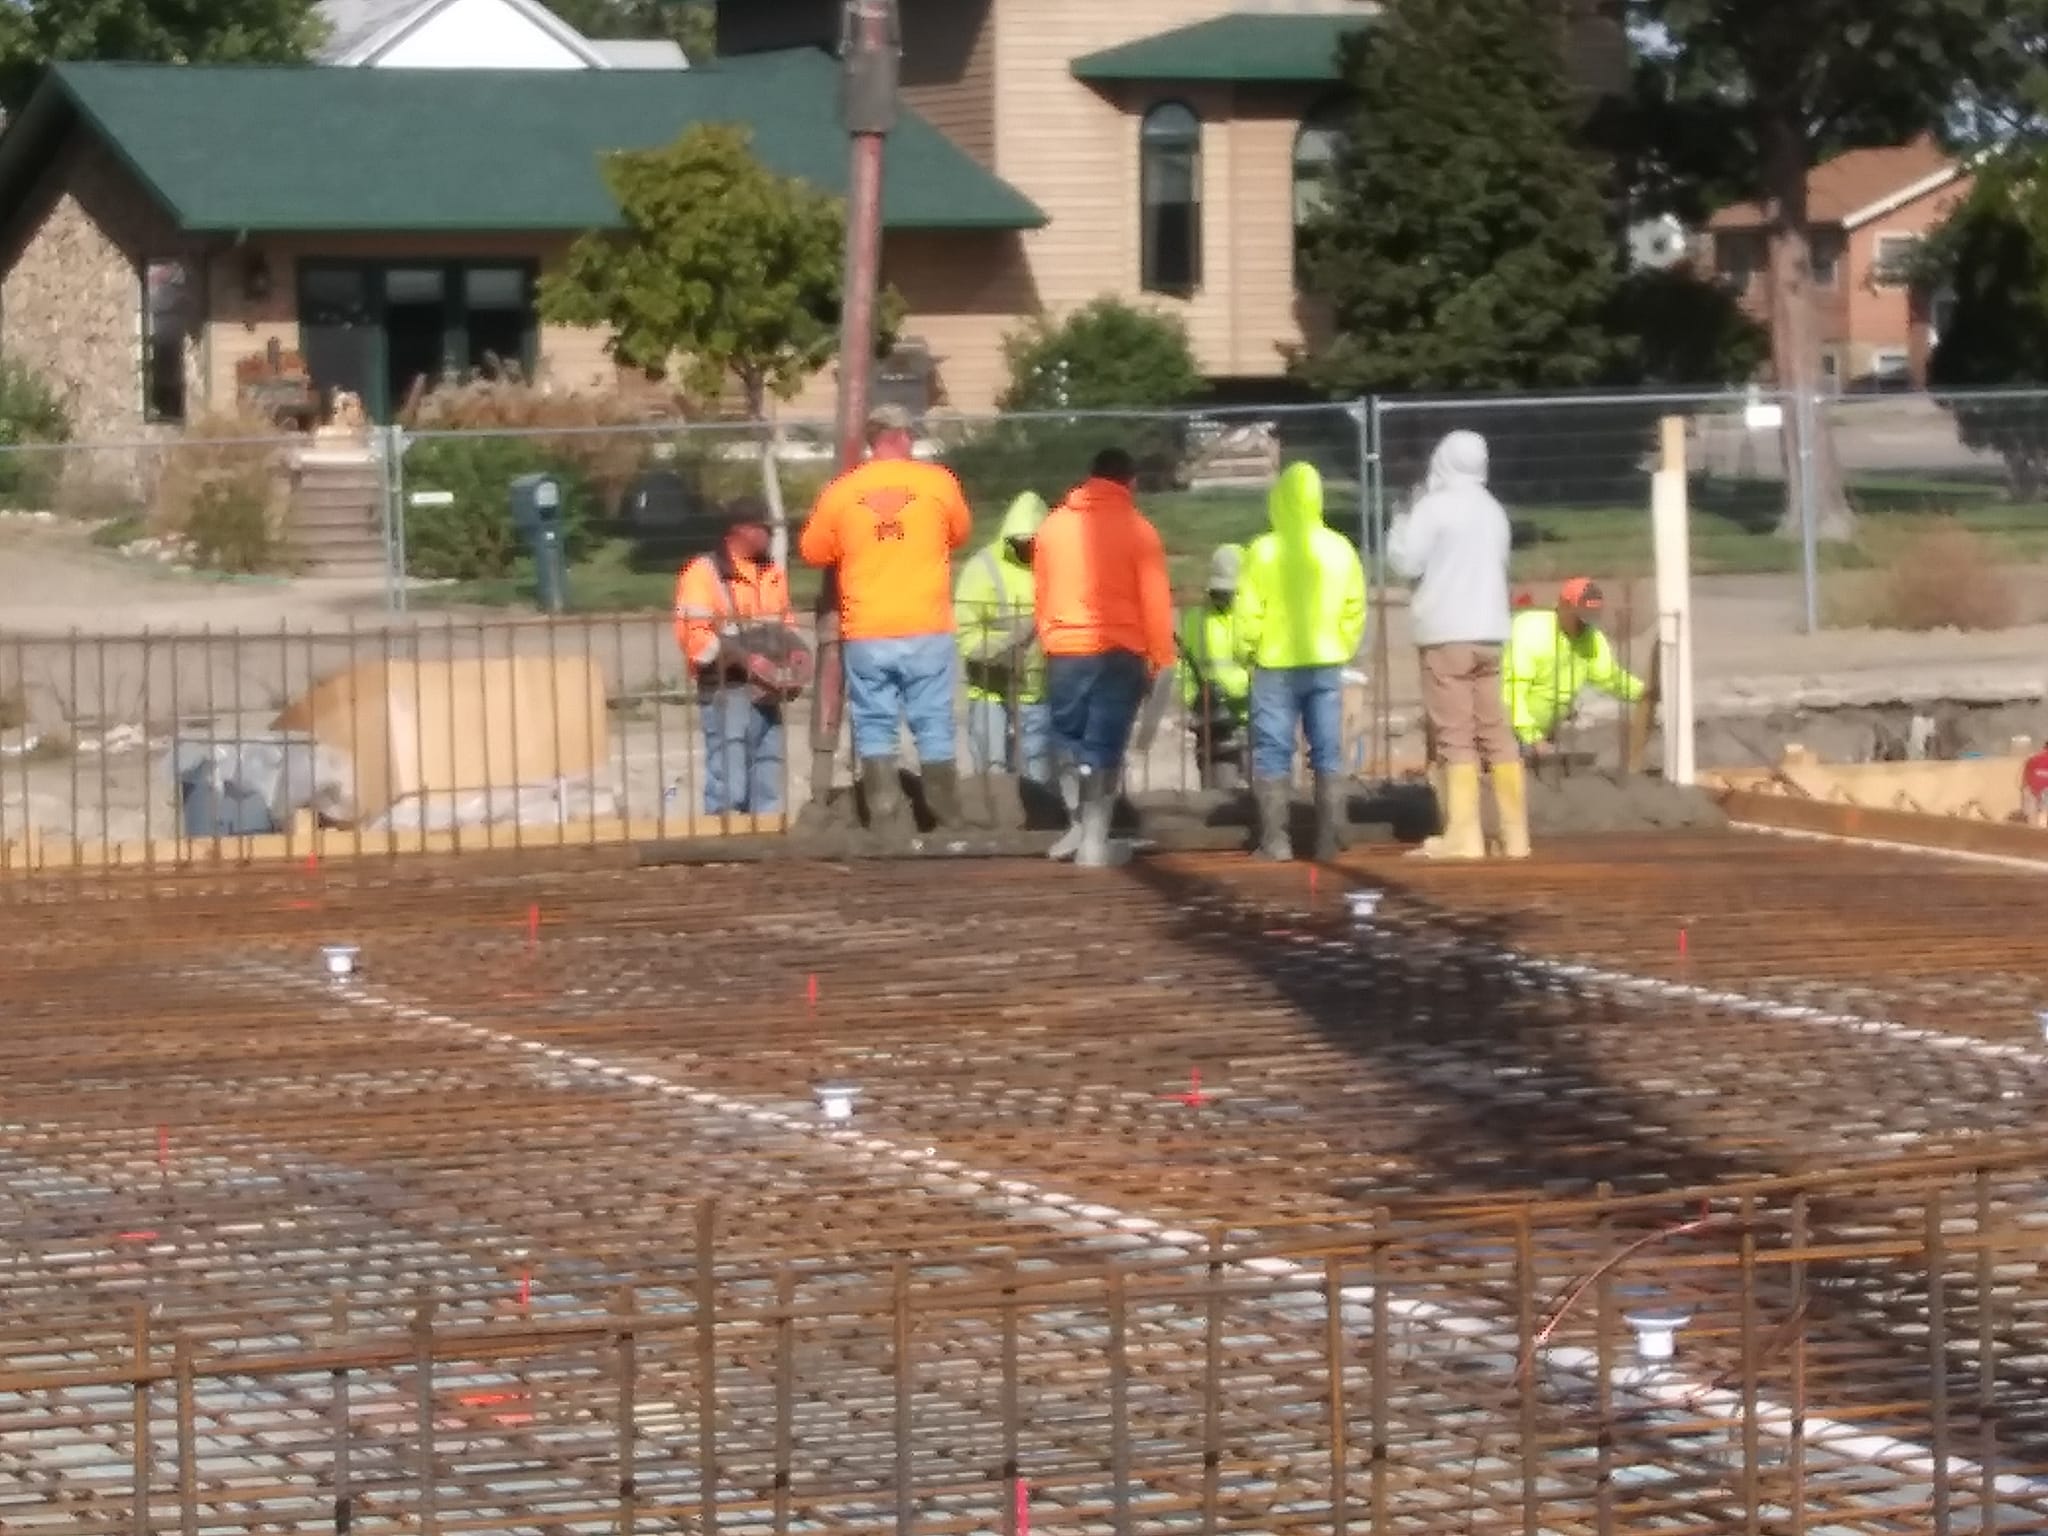 Pierre Outdoor Pool Construction Continues With Finishing Of 50-Meter Pool Floor